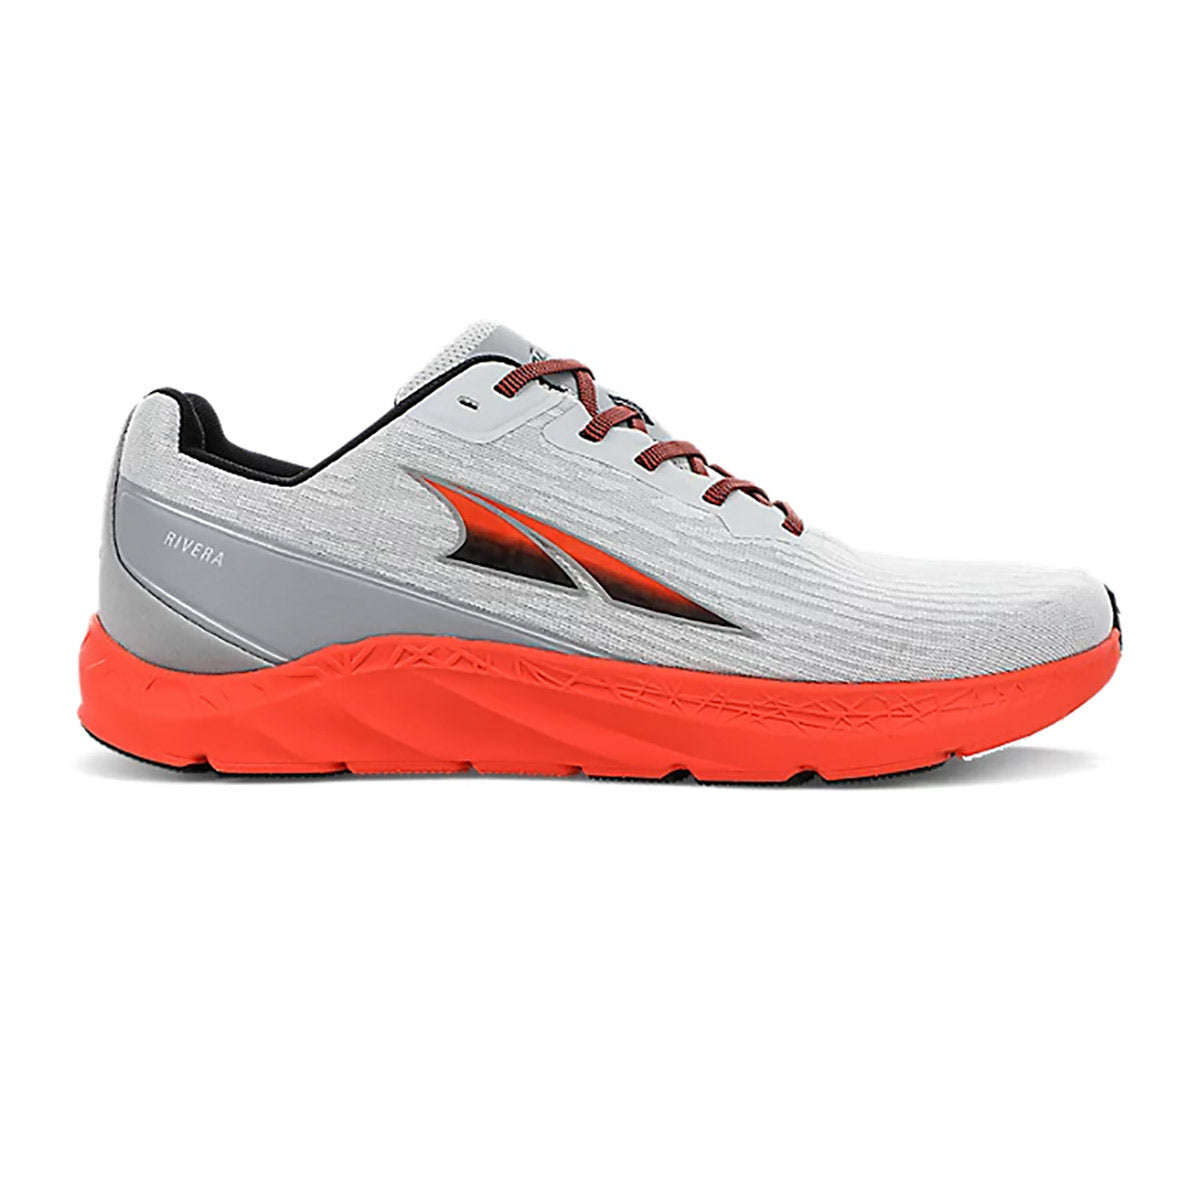 Replace the product in the sentence below with the given product name and brand name.
Sentence: A single gray Altra Rivera running shoe with a vibrant orange sole, Balanced Cushioning, and a black logo on the side.
Product Name: ALTRA RIVERA GREY/ORANGE - MENS
Brand Name: Altra

Revised Sentence: A single ALTRA RIVERA GREY/ORANGE - MEN&#39;S running shoe with a vibrant orange sole, Balanced Cushioning, and a black logo on the side.